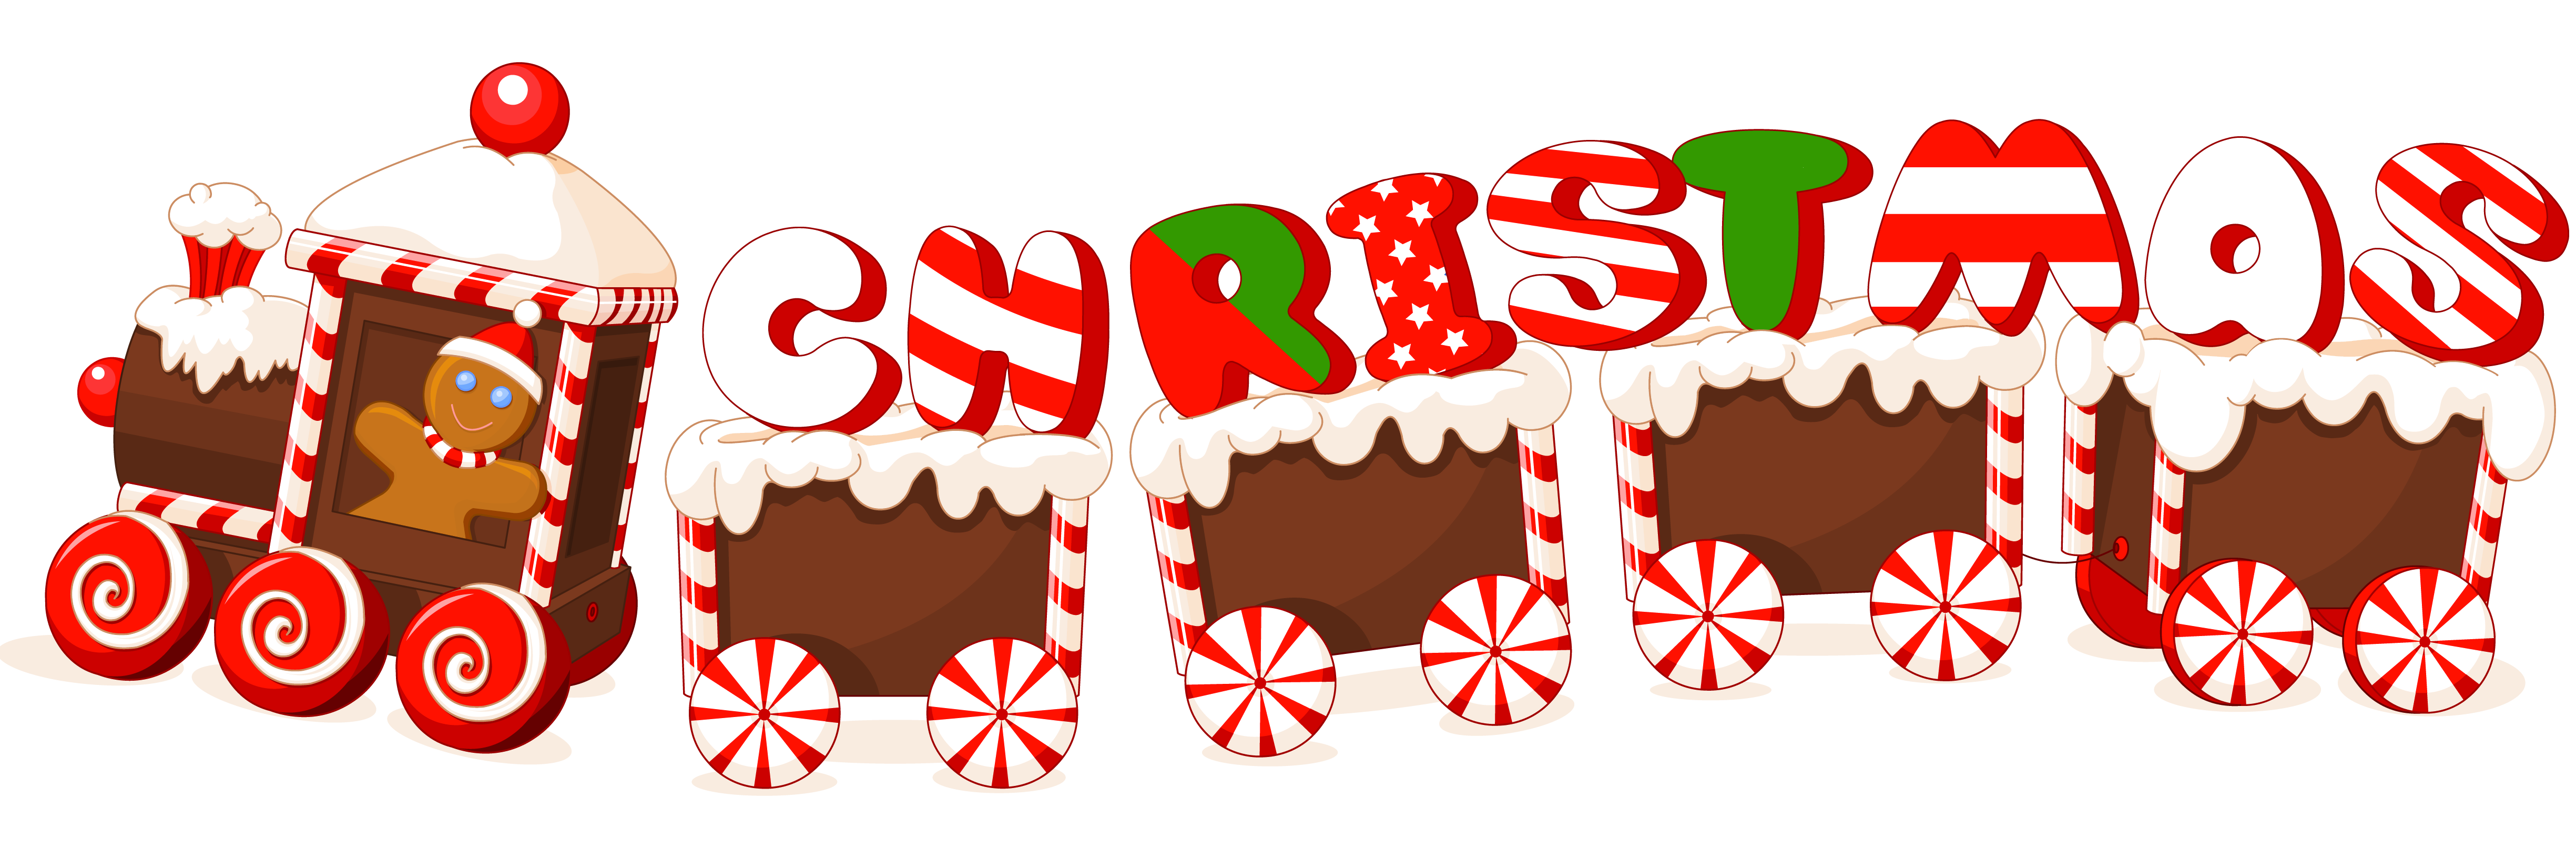 christmas label clipart free - photo #43